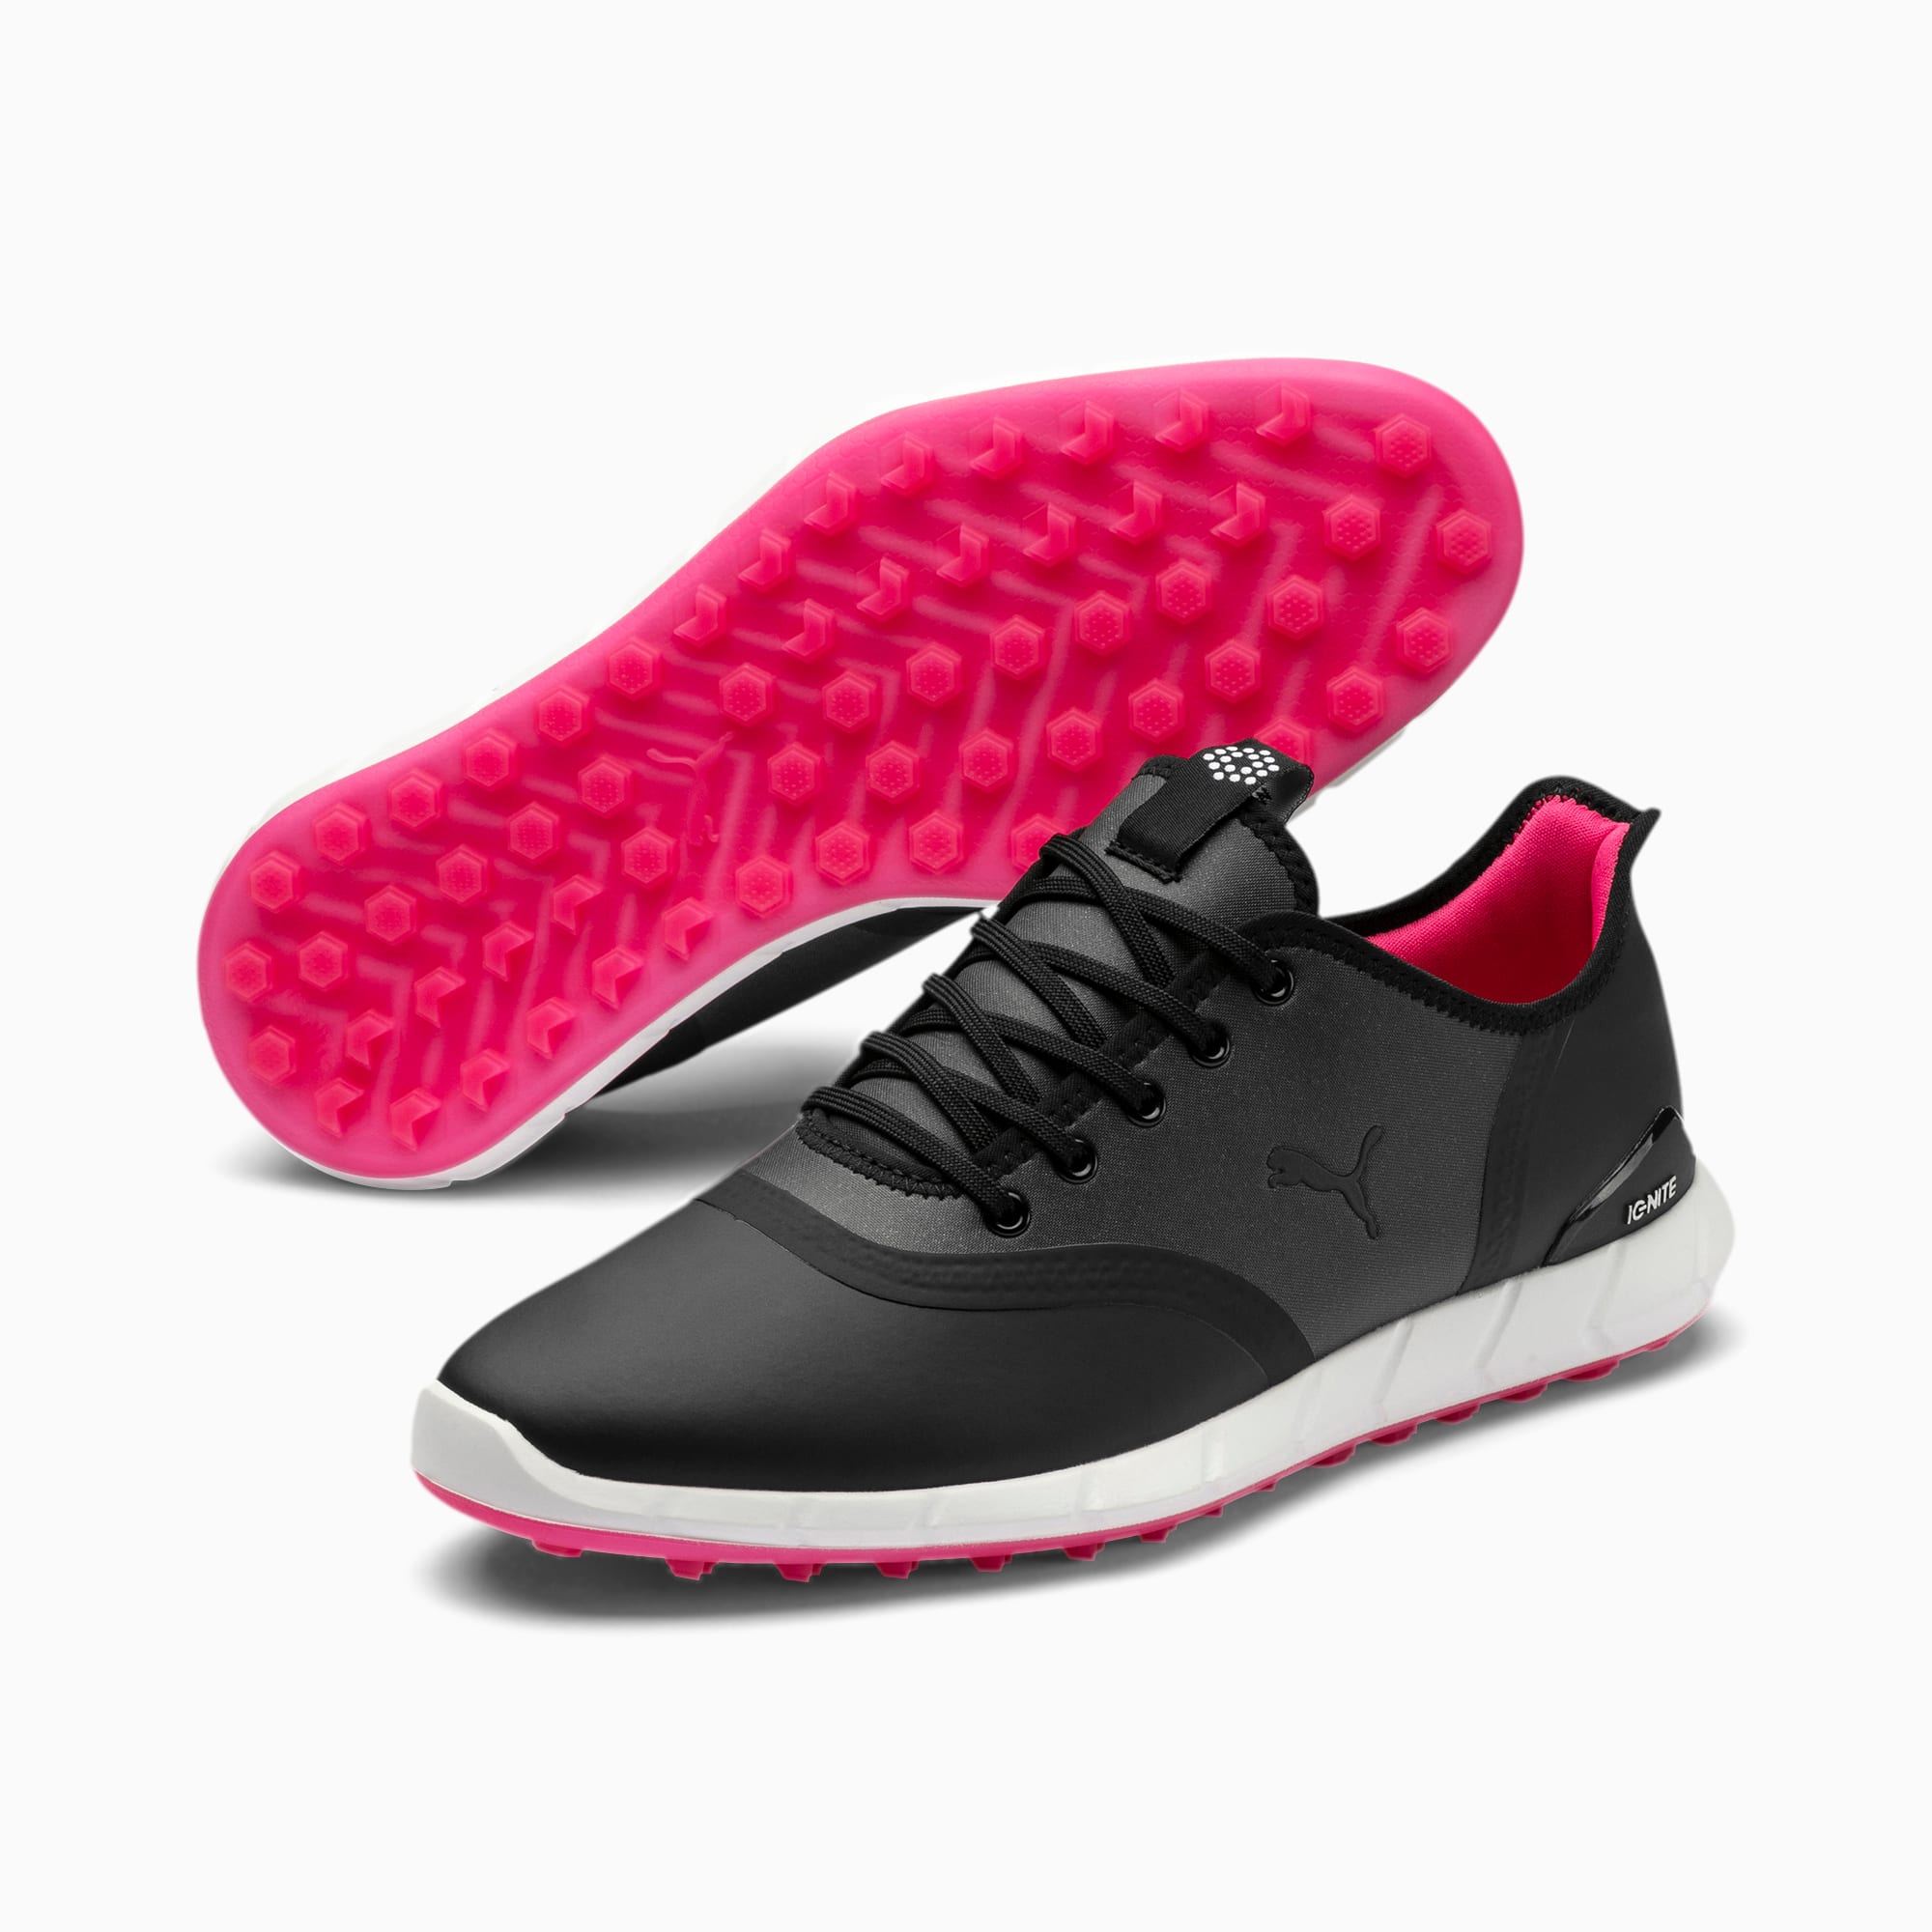 IGNITE Statement Low Women's Golf Shoes 